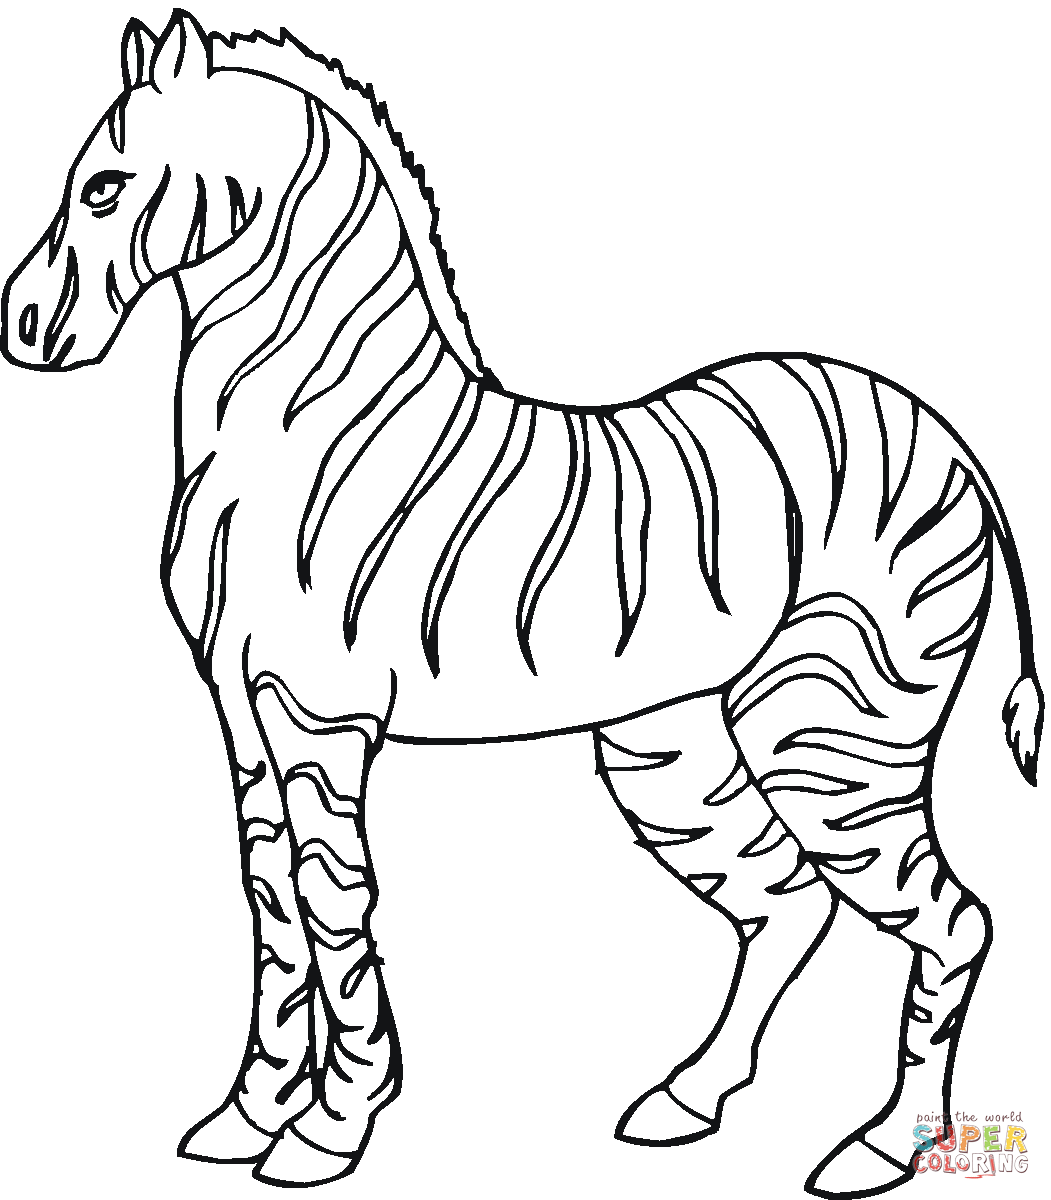 Zebras coloring pages.